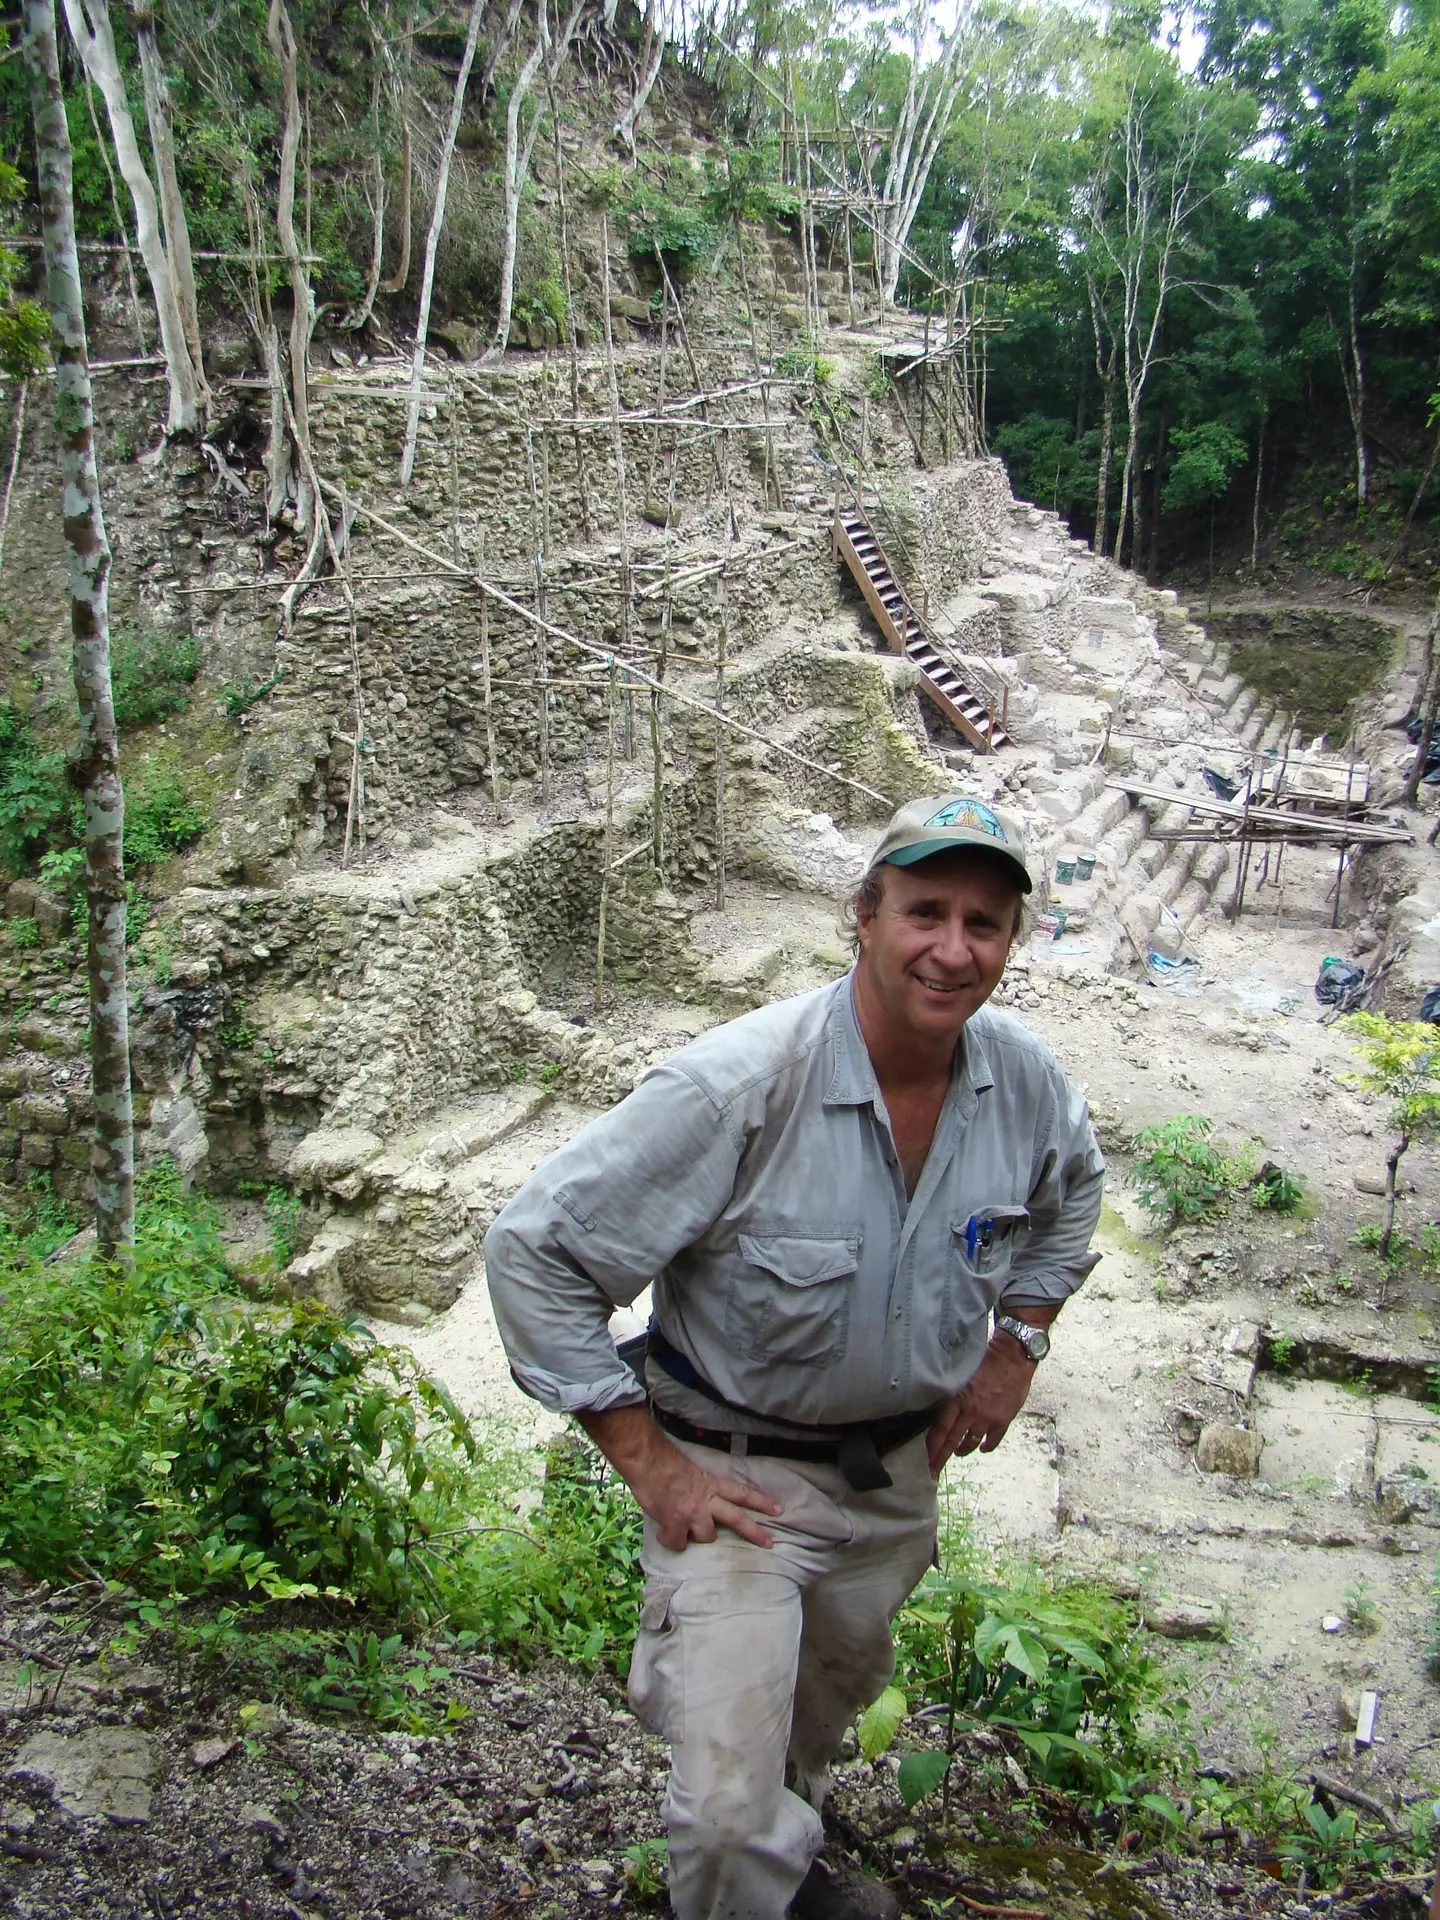 Richard Hansen was one of the many archaeologists involved in the project.